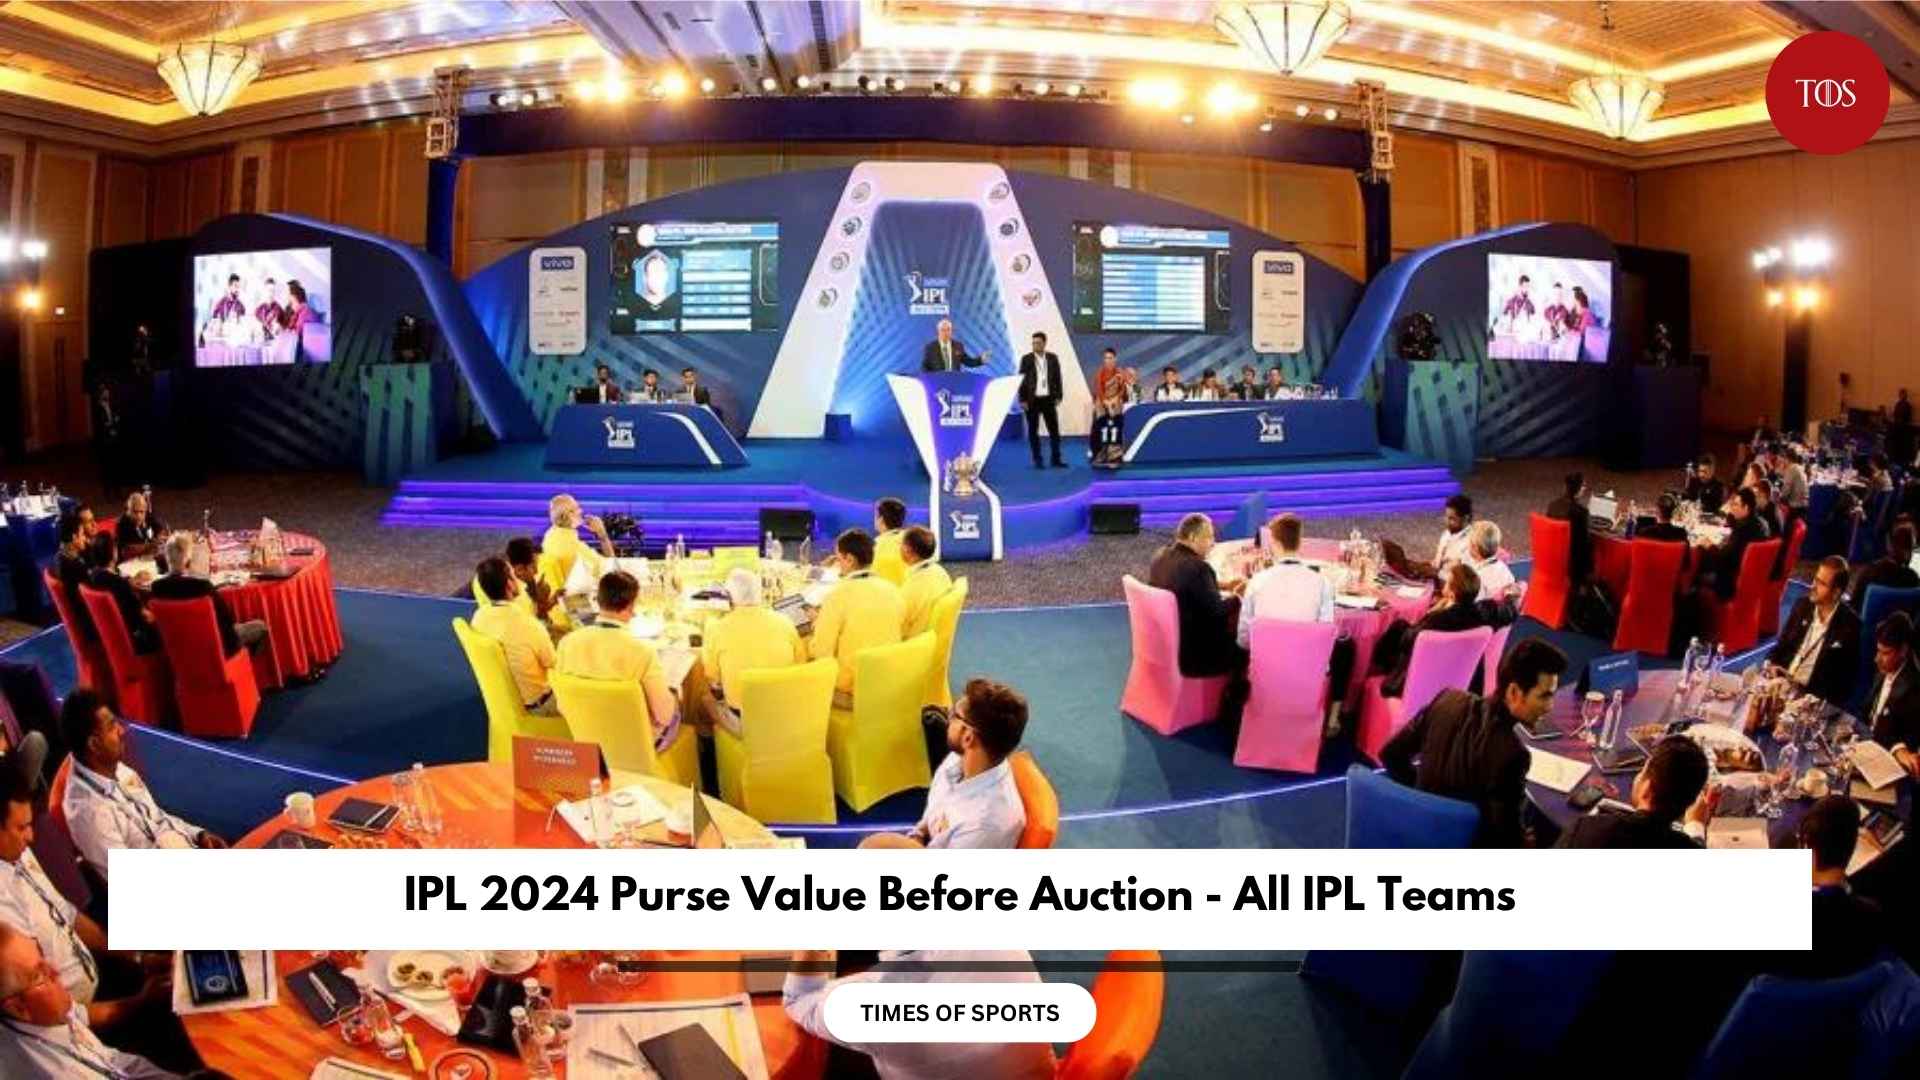 Remaining purse of all teams for IPL 2024 auction